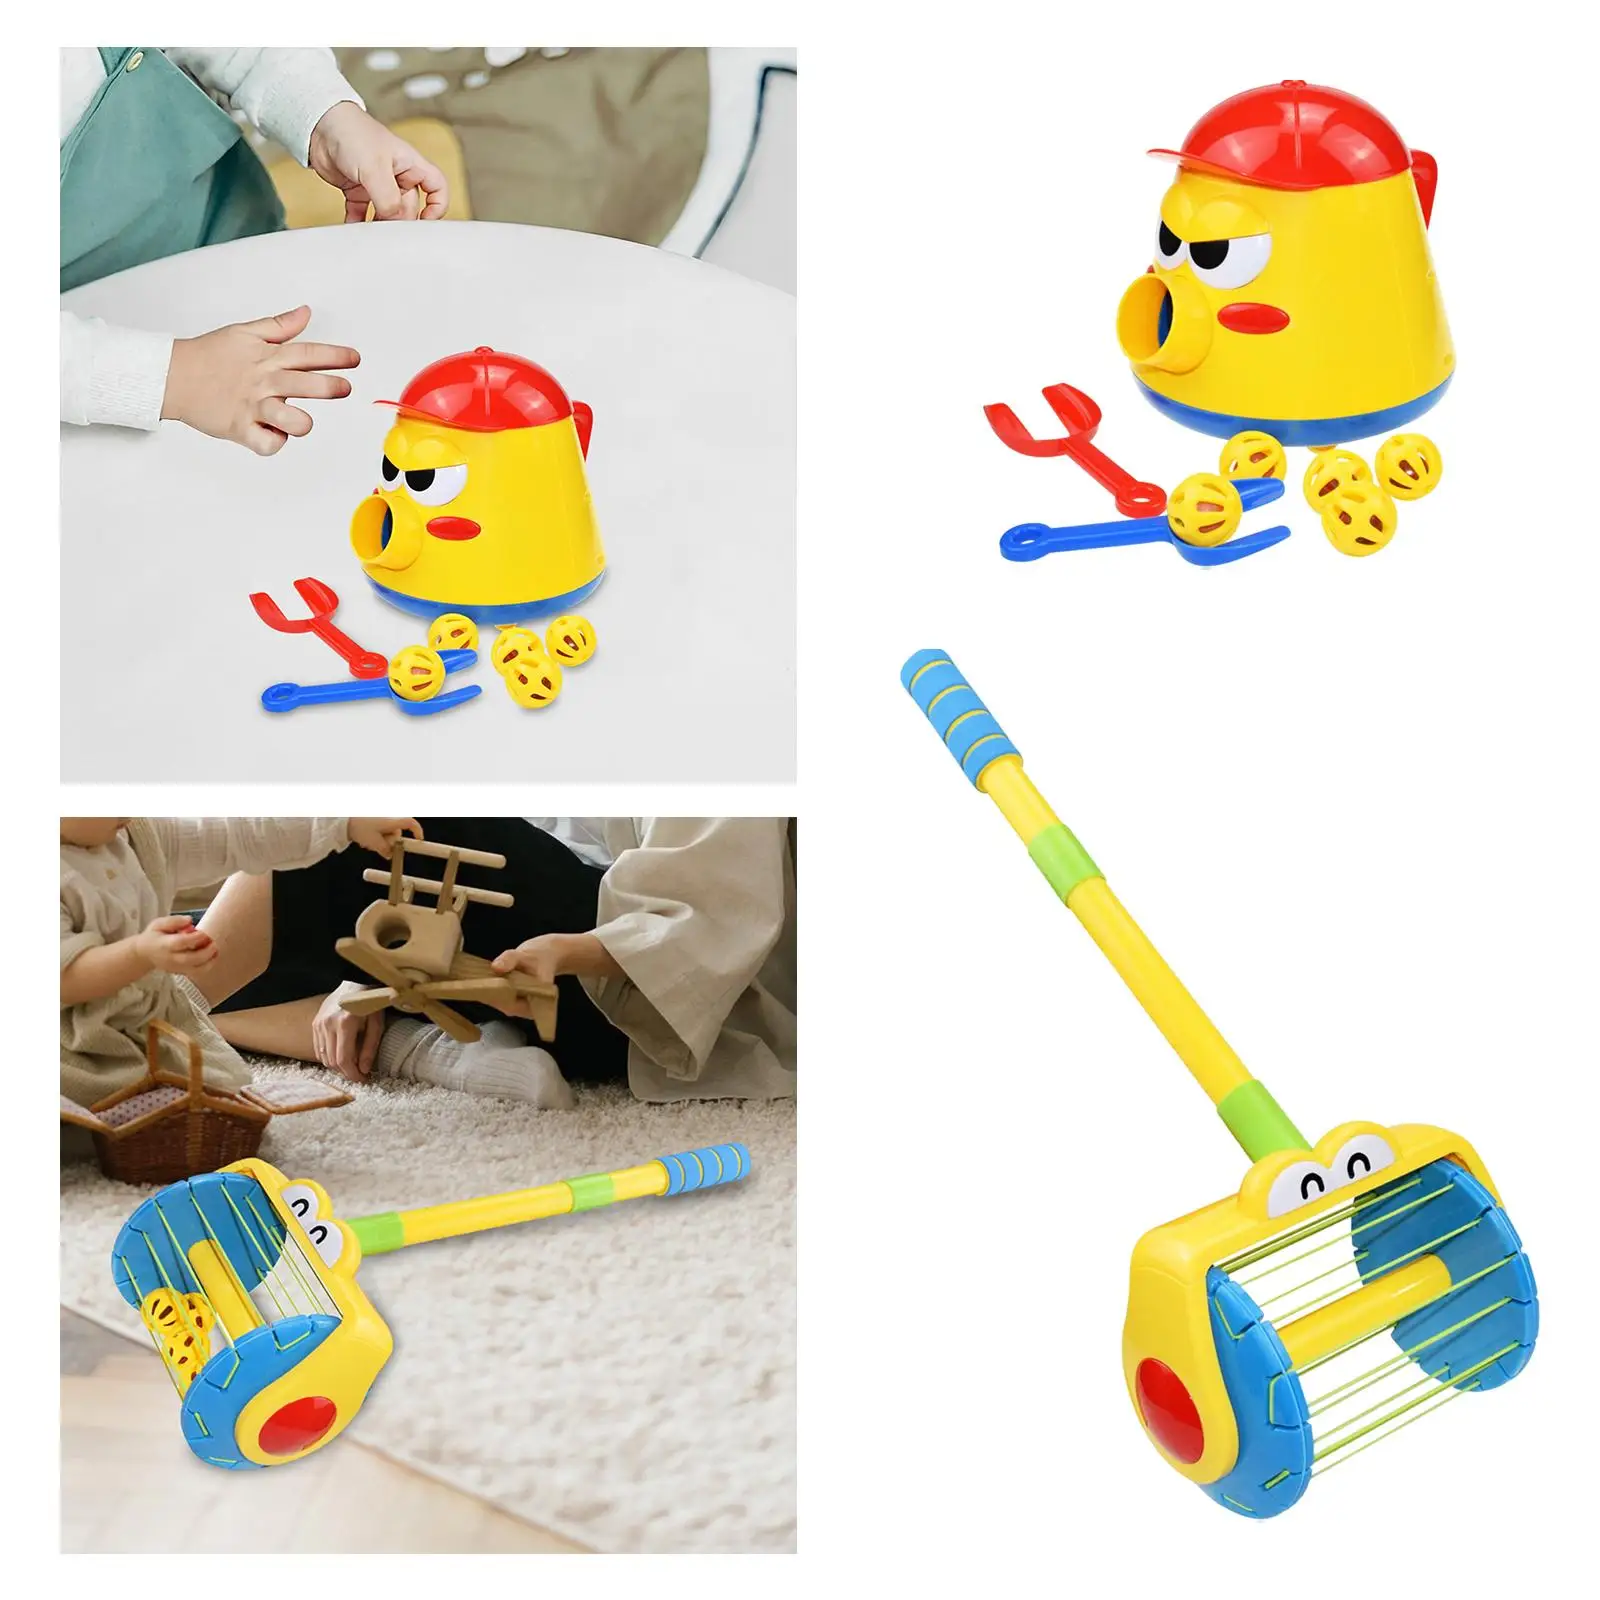 Outdoor Launching Ball Kids Toy Durable Material Baby Activity Toy Preschool